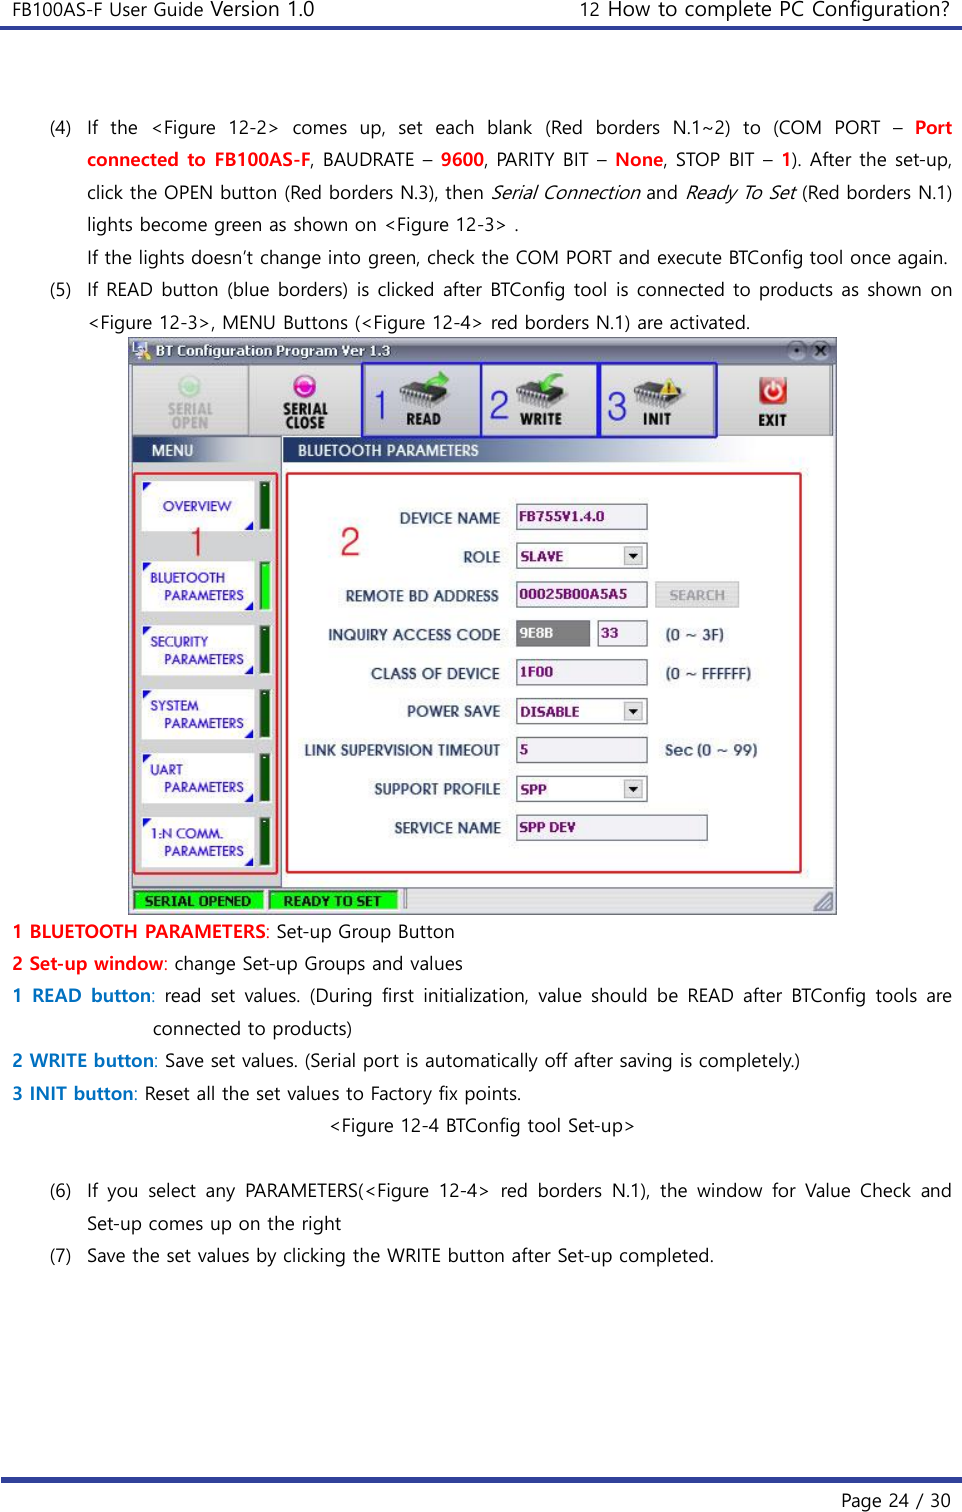 FB100AS-F User Guide Version 1.0 12 How to complete PC Configuration?   Page 24 / 30   (4) If  the  &lt;Figure  12-2&gt;  comes  up,  set  each  blank  (Red  borders  N.1~2)  to  (COM  PORT  –  Port connected to FB100AS-F, BAUDRATE – 9600, PARITY BIT – None, STOP BIT – 1). After the set-up, click the OPEN button (Red borders N.3), then Serial Connection and Ready To Set (Red borders N.1) lights become green as shown on &lt;Figure 12-3&gt; . If the lights doesn’t change into green, check the COM PORT and execute BTConfig tool once again. (5) If READ button (blue borders) is clicked after BTConfig tool is connected to products as shown on &lt;Figure 12-3&gt;, MENU Buttons (&lt;Figure 12-4&gt; red borders N.1) are activated.  1 BLUETOOTH PARAMETERS: Set-up Group Button 2 Set-up window: change Set-up Groups and values 1  READ  button:  read set  values. (During  first initialization,  value  should  be  READ  after  BTConfig tools  are connected to products) 2 WRITE button: Save set values. (Serial port is automatically off after saving is completely.) 3 INIT button: Reset all the set values to Factory fix points. &lt;Figure 12-4 BTConfig tool Set-up&gt;  (6) If  you  select  any  PARAMETERS(&lt;Figure  12-4&gt;  red  borders  N.1),  the  window  for  Value  Check  and Set-up comes up on the right (7) Save the set values by clicking the WRITE button after Set-up completed. 